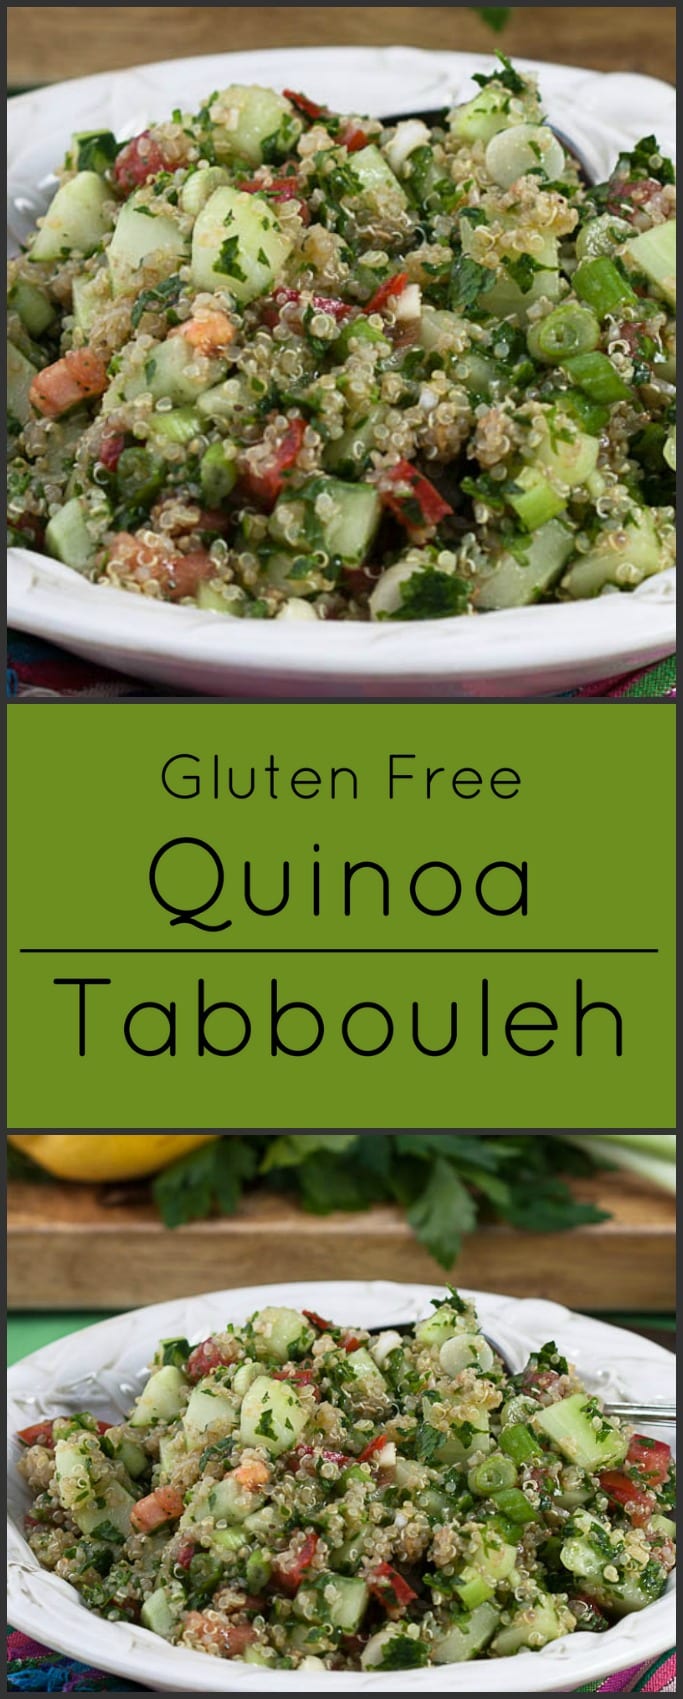 Quinoa tabbouleh is the perfect summer side dish. Bulgur wheat is replaced by gluten free quinoa. 